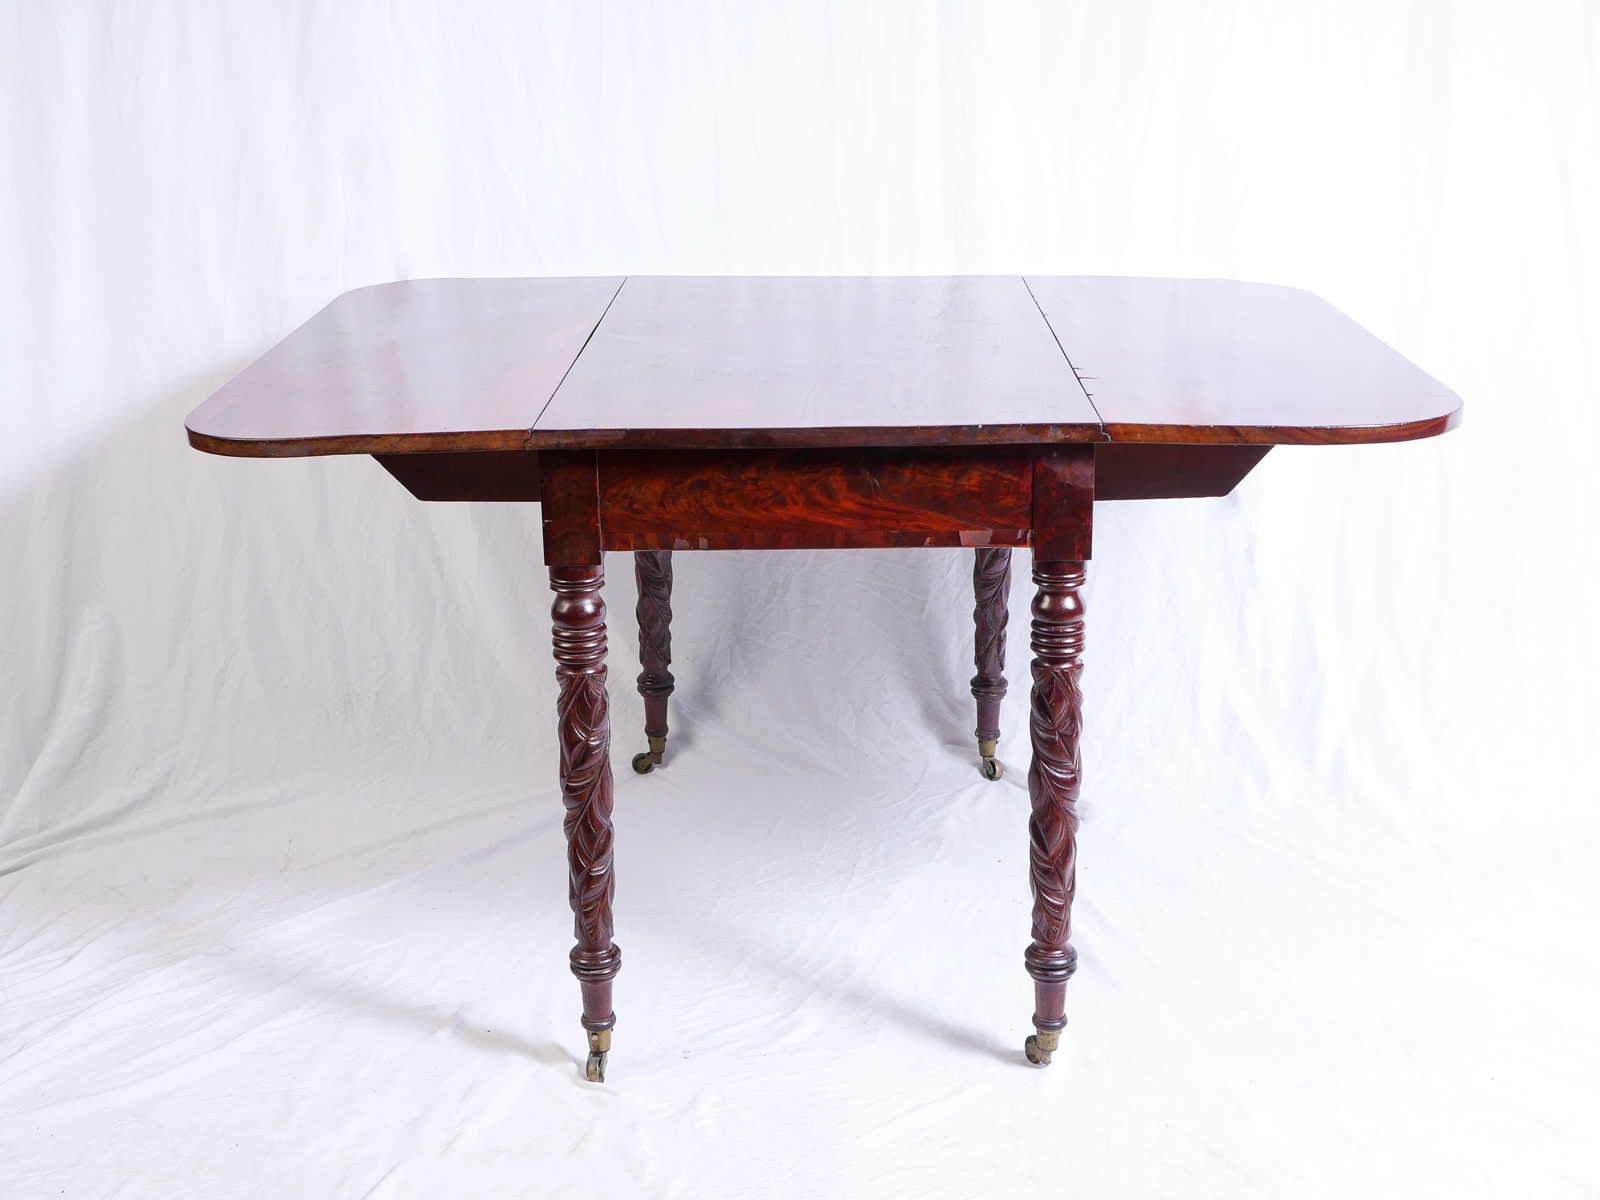 CARVED MAHOGANY DROP LEAF TABLE: